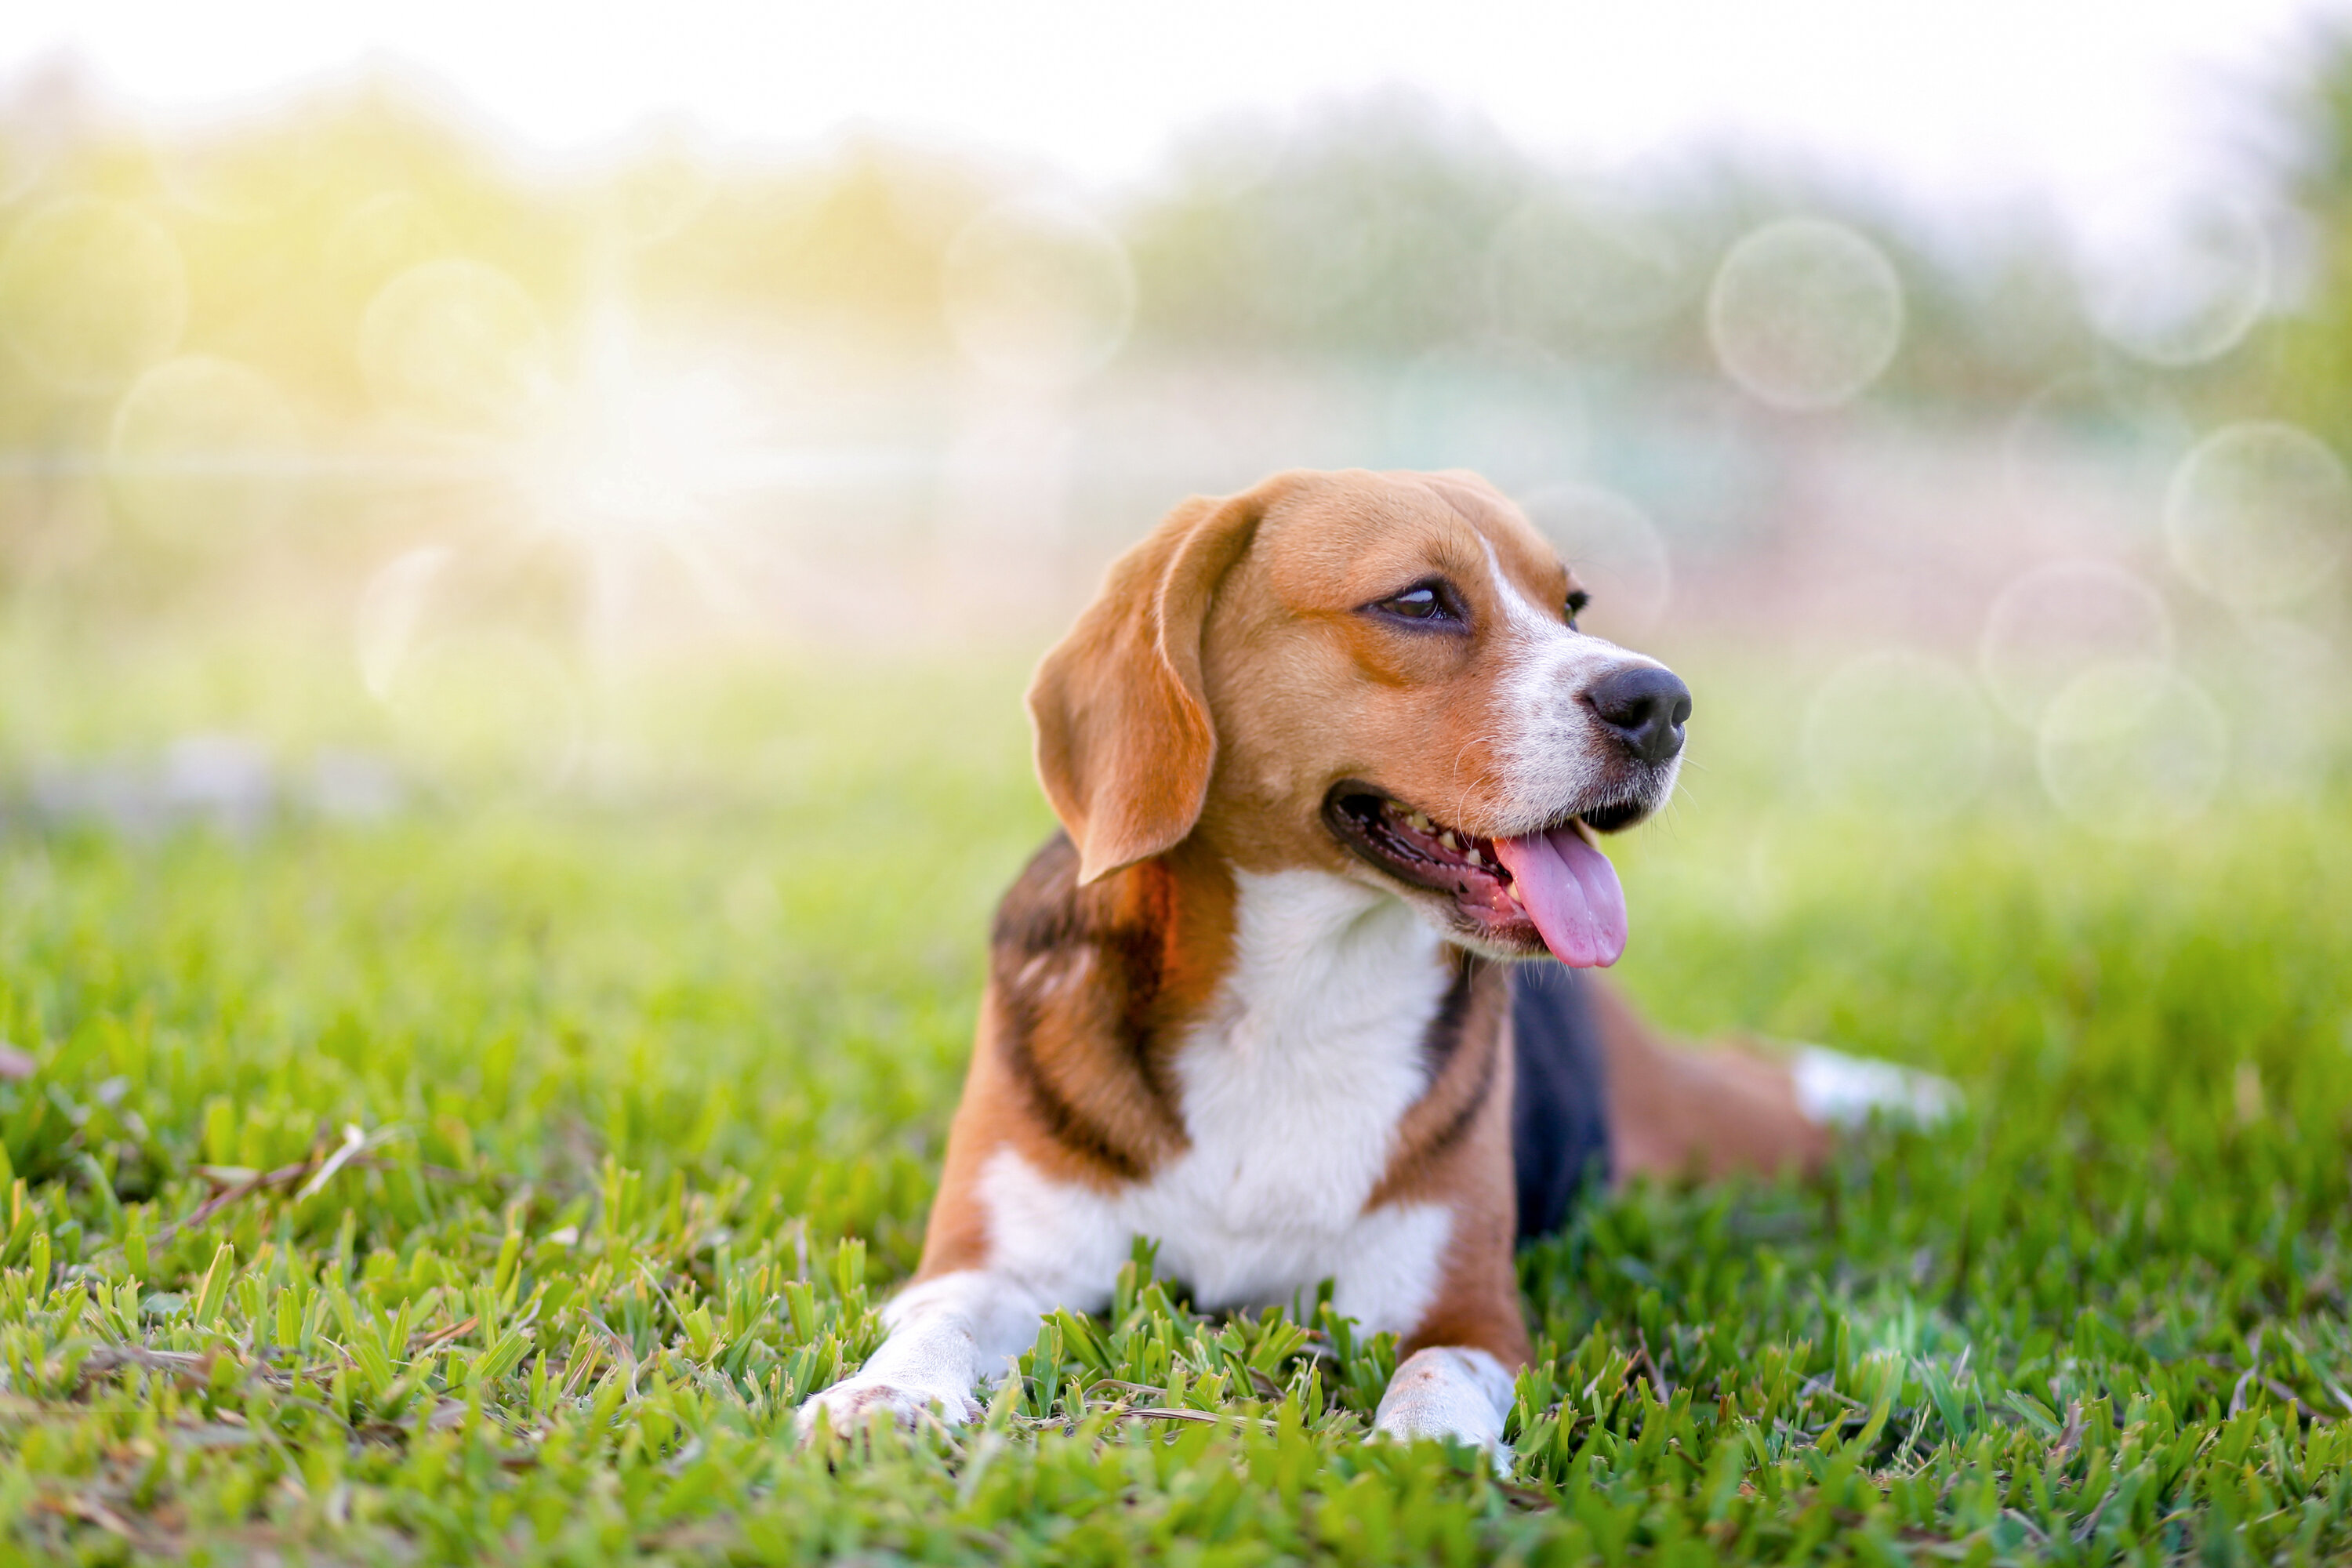 A beagle laying down in the grass with its tongue hanging out looking away from the camera, with a sunset in the background